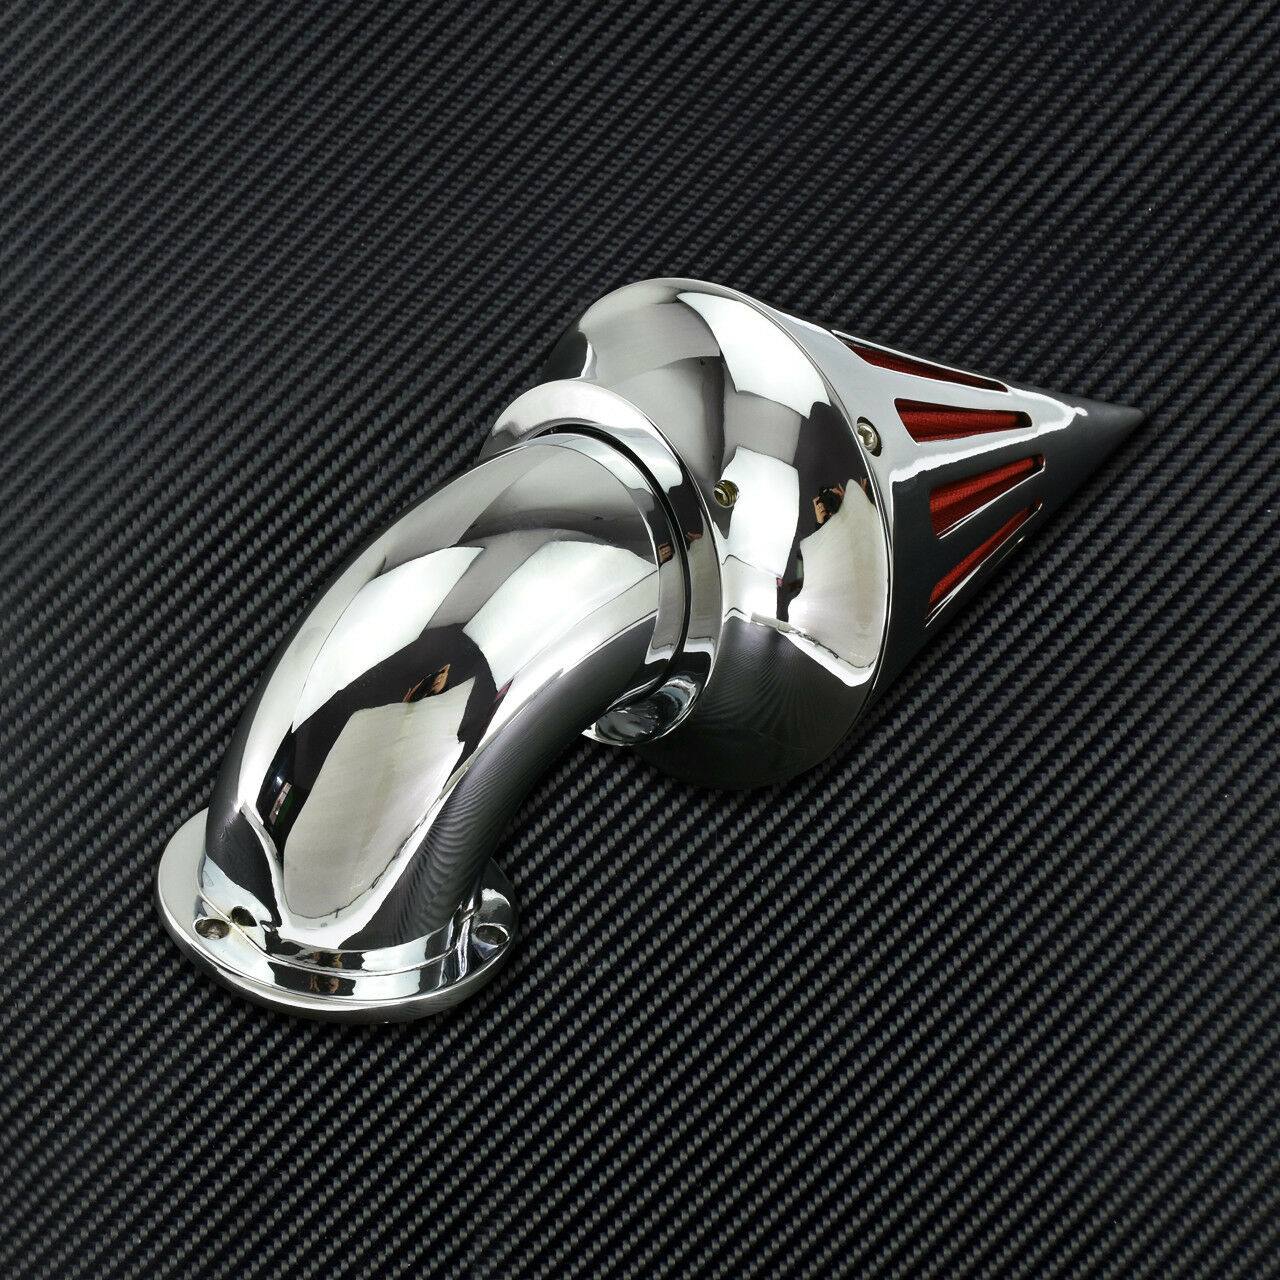 Spike Air Cleaner Intake Filter Fit For Harley Sportster 883 1200 04-19 Chrome - Moto Life Products